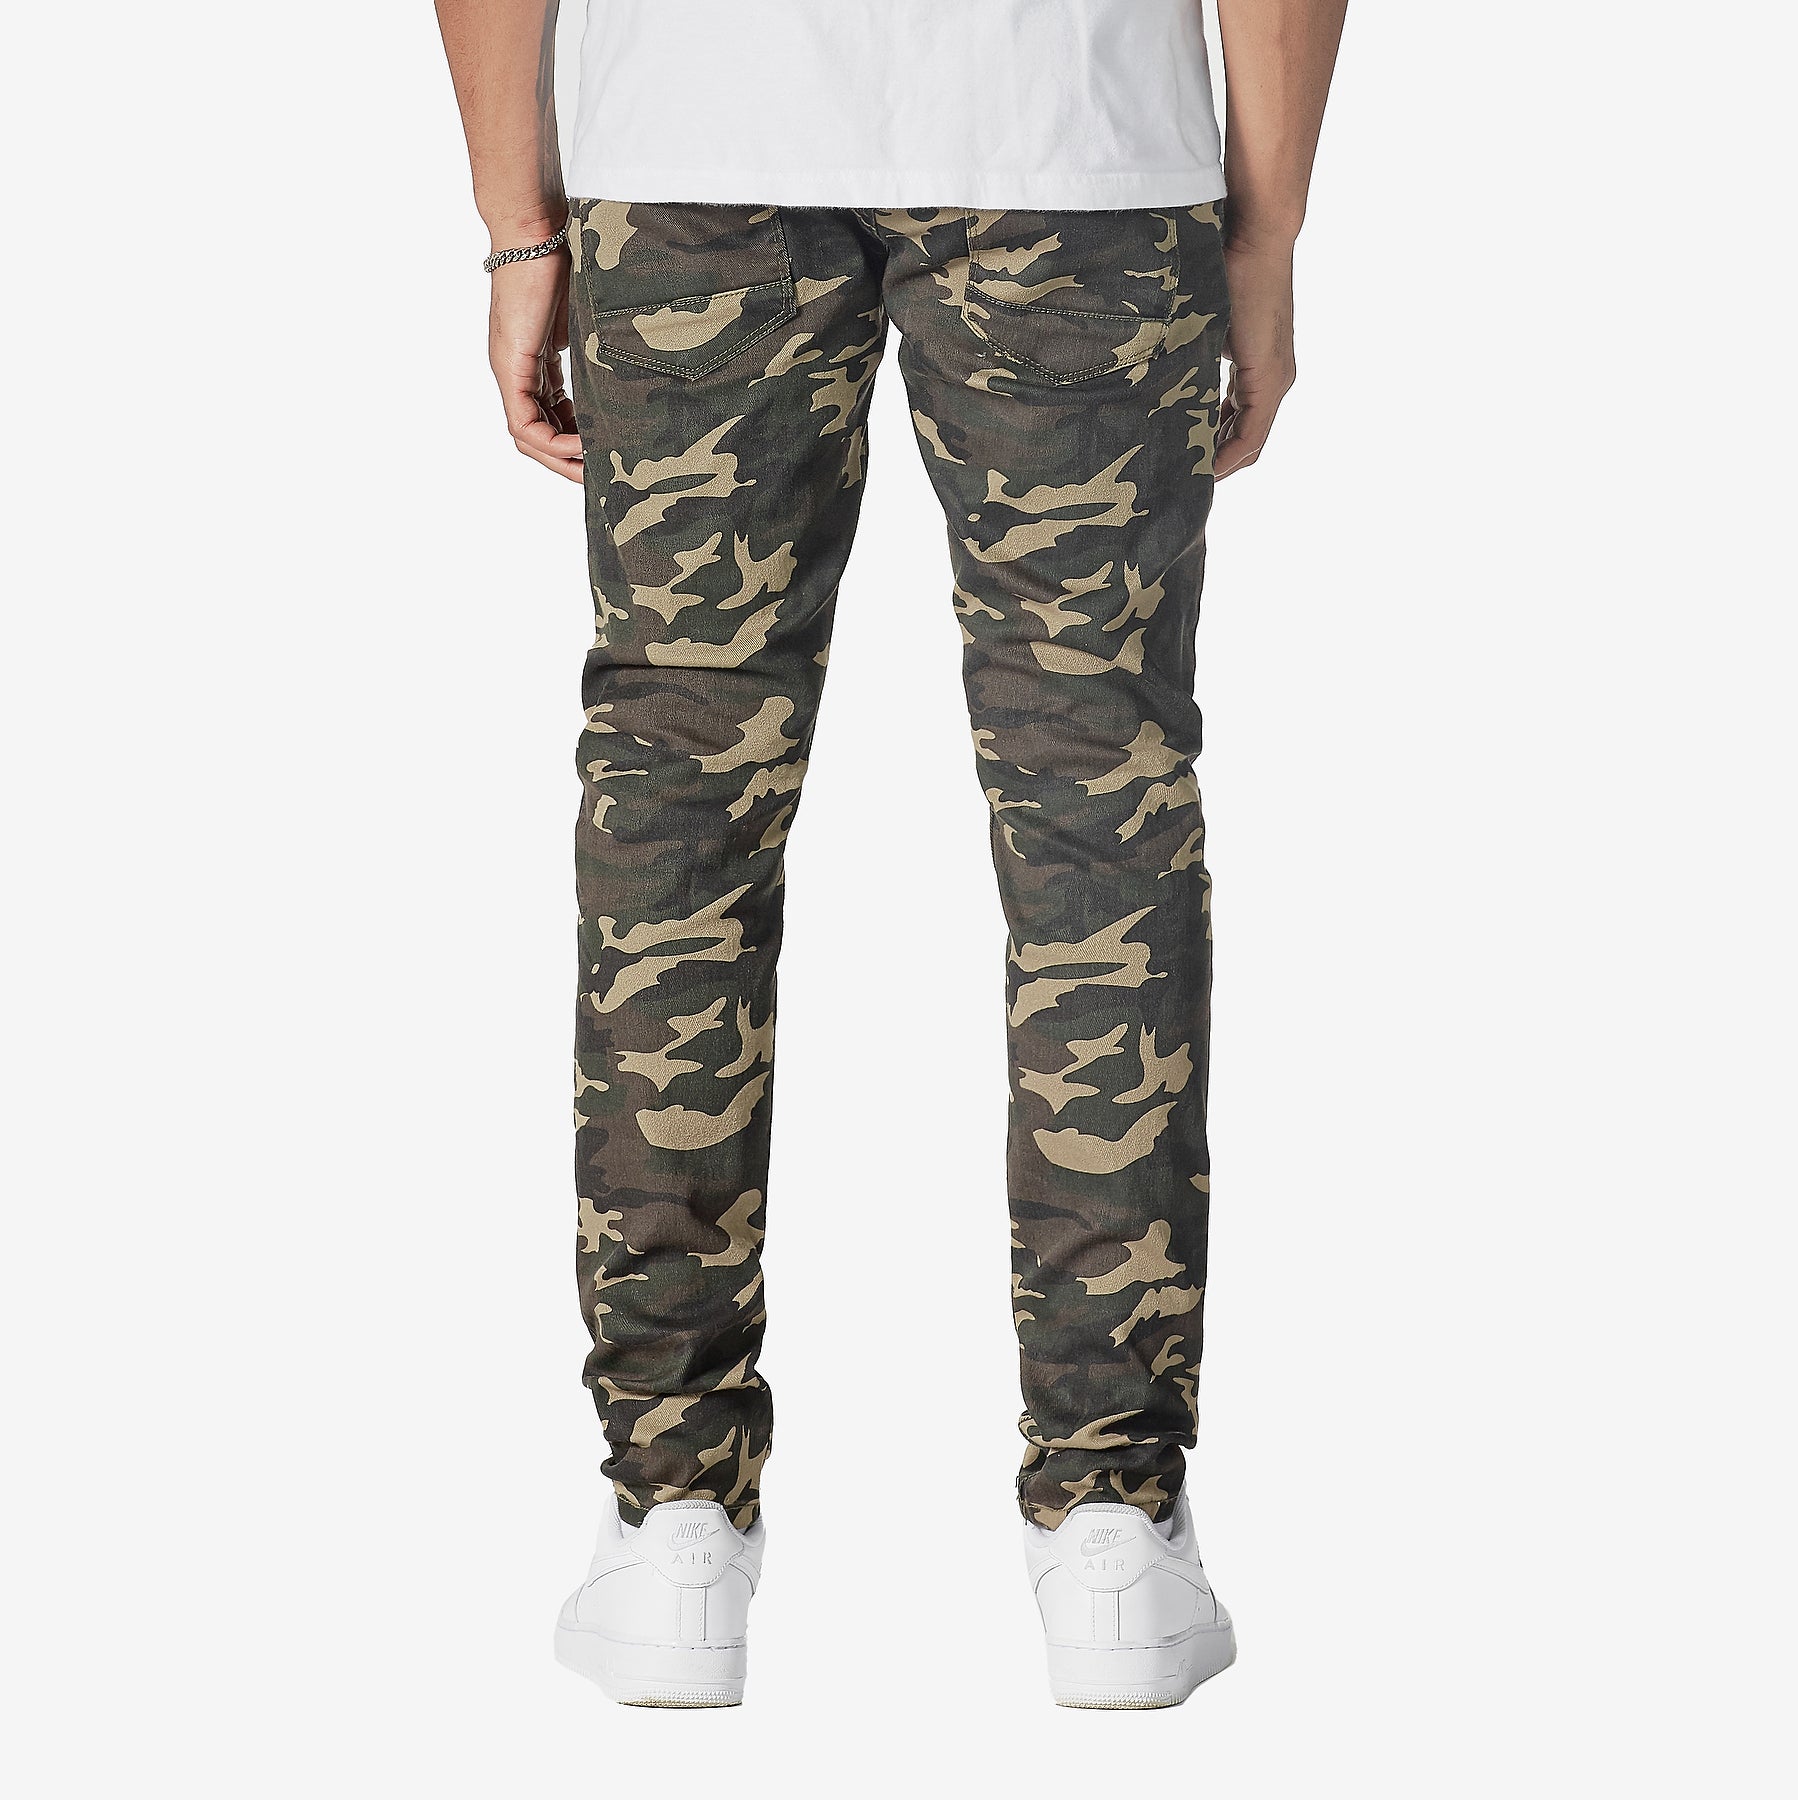 OLIVE CAMO PANTS WITH RIPS - Copper Rivet